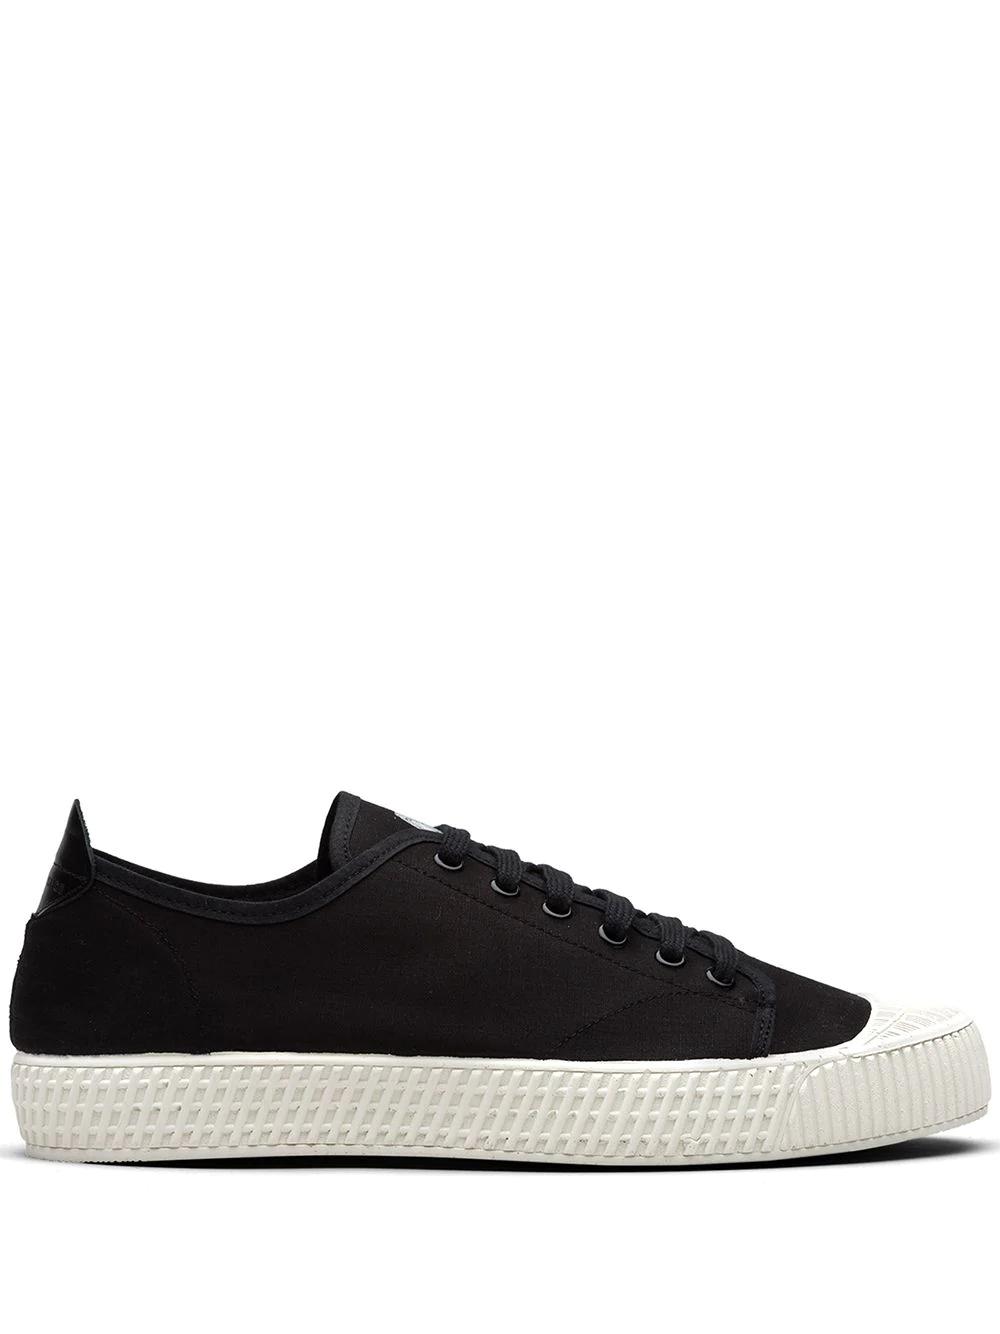 canvas low-top sneakers by CAR SHOE